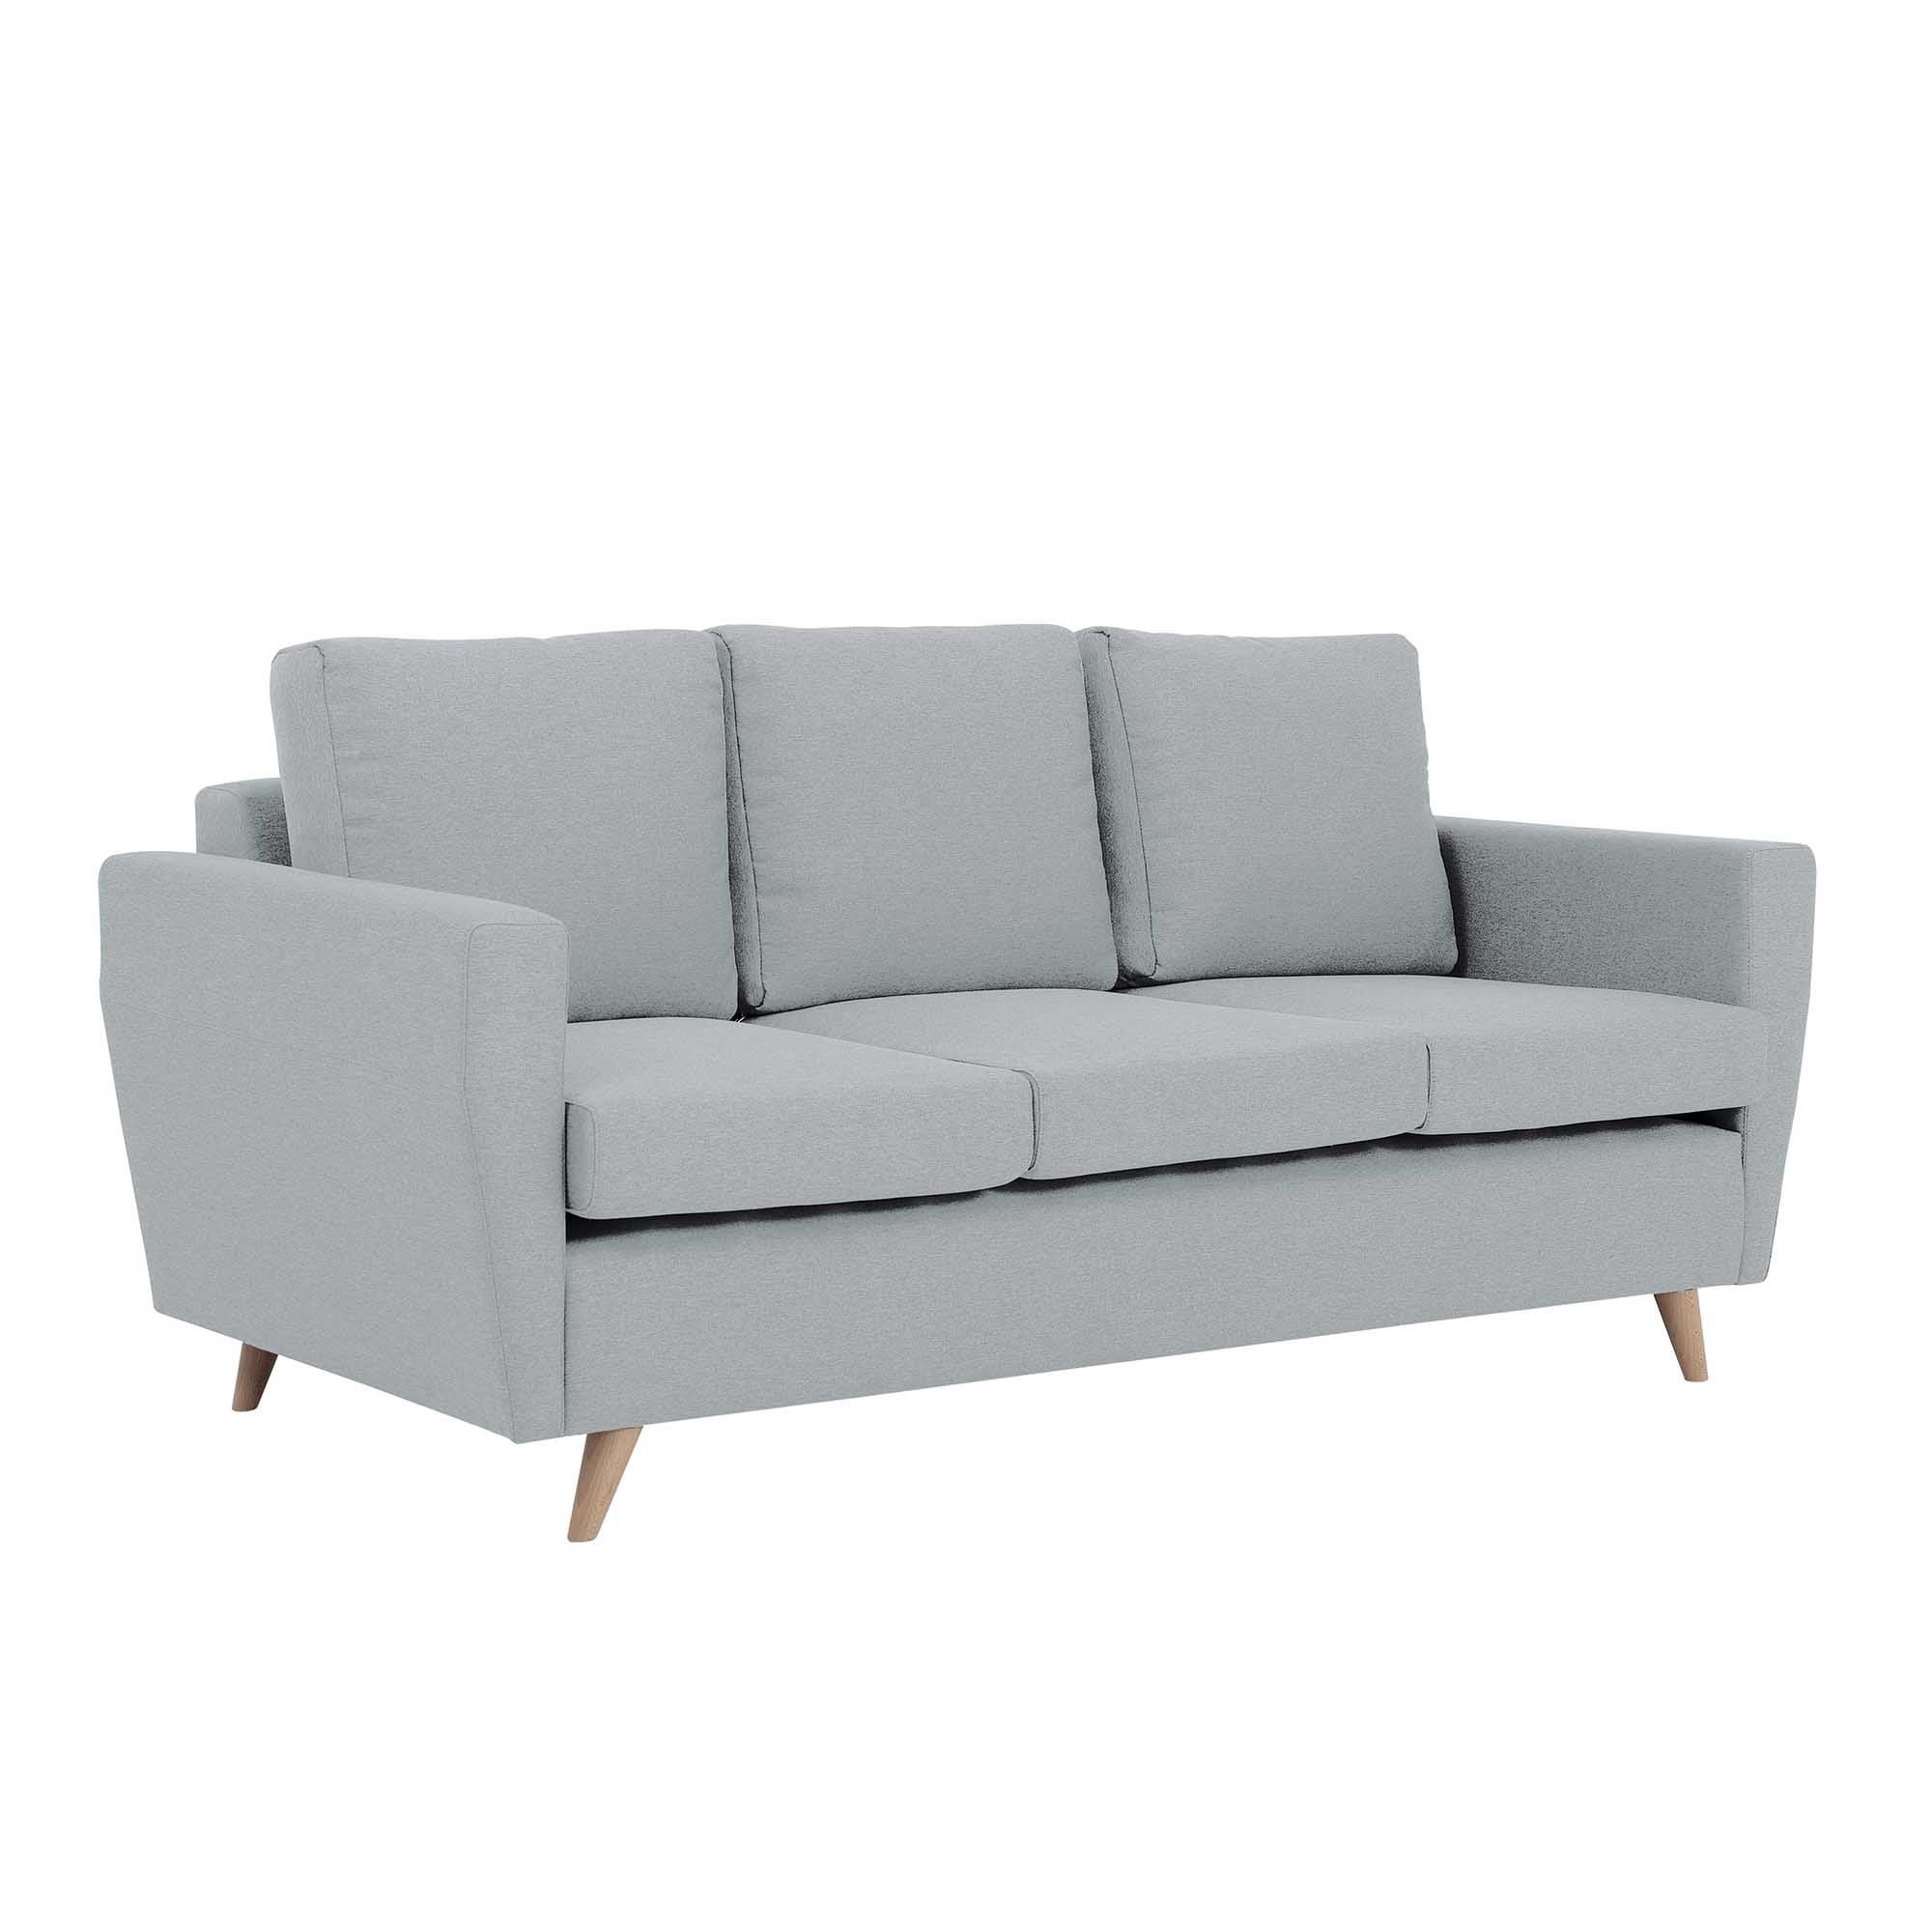 LOVER Sofa 3 Seater upholstery colour-platinum grey